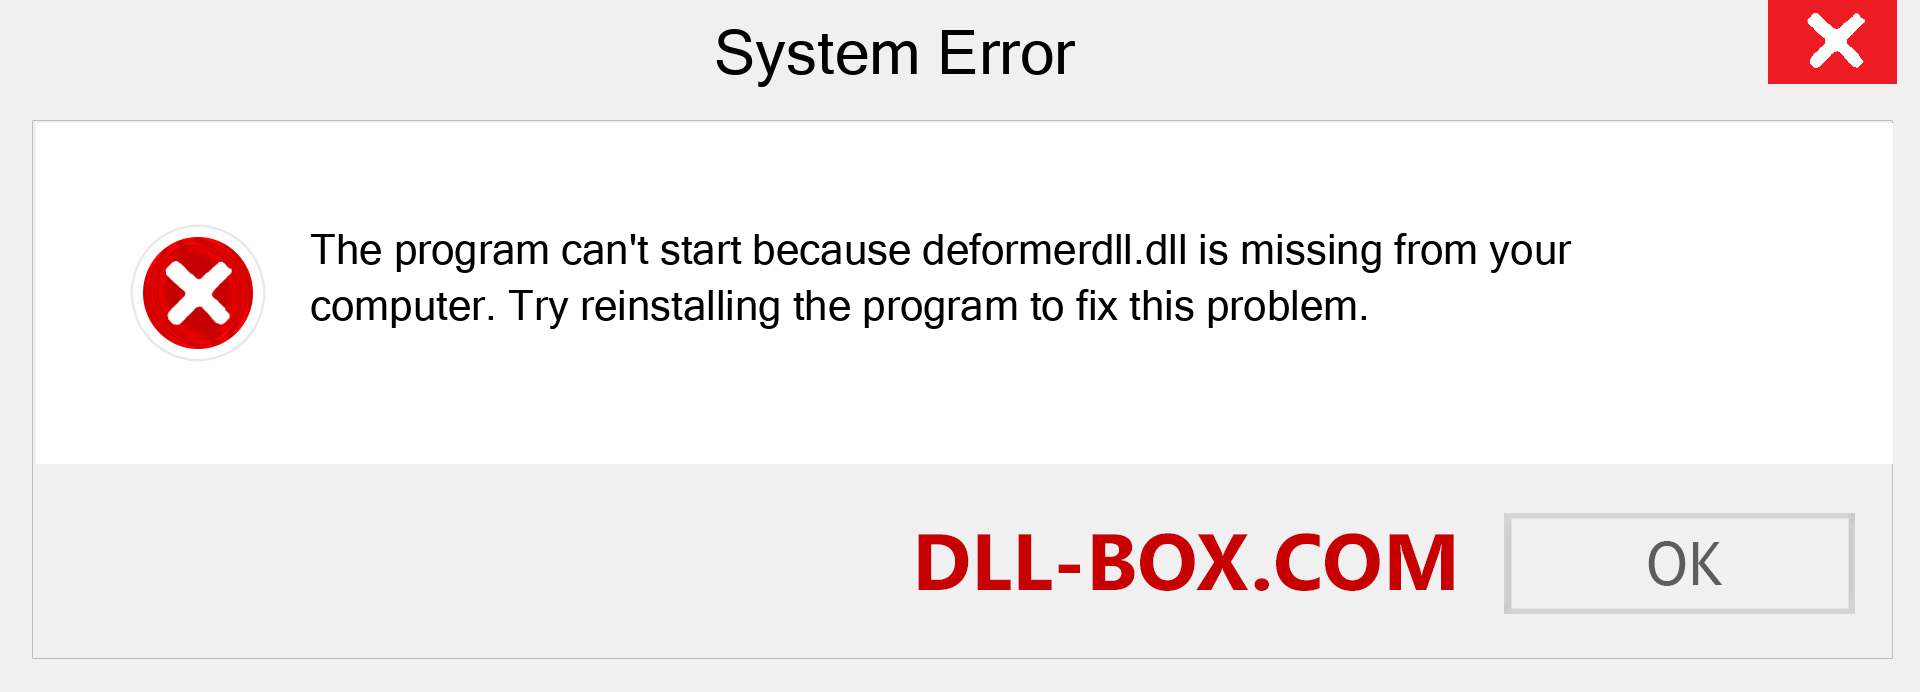  deformerdll.dll file is missing?. Download for Windows 7, 8, 10 - Fix  deformerdll dll Missing Error on Windows, photos, images